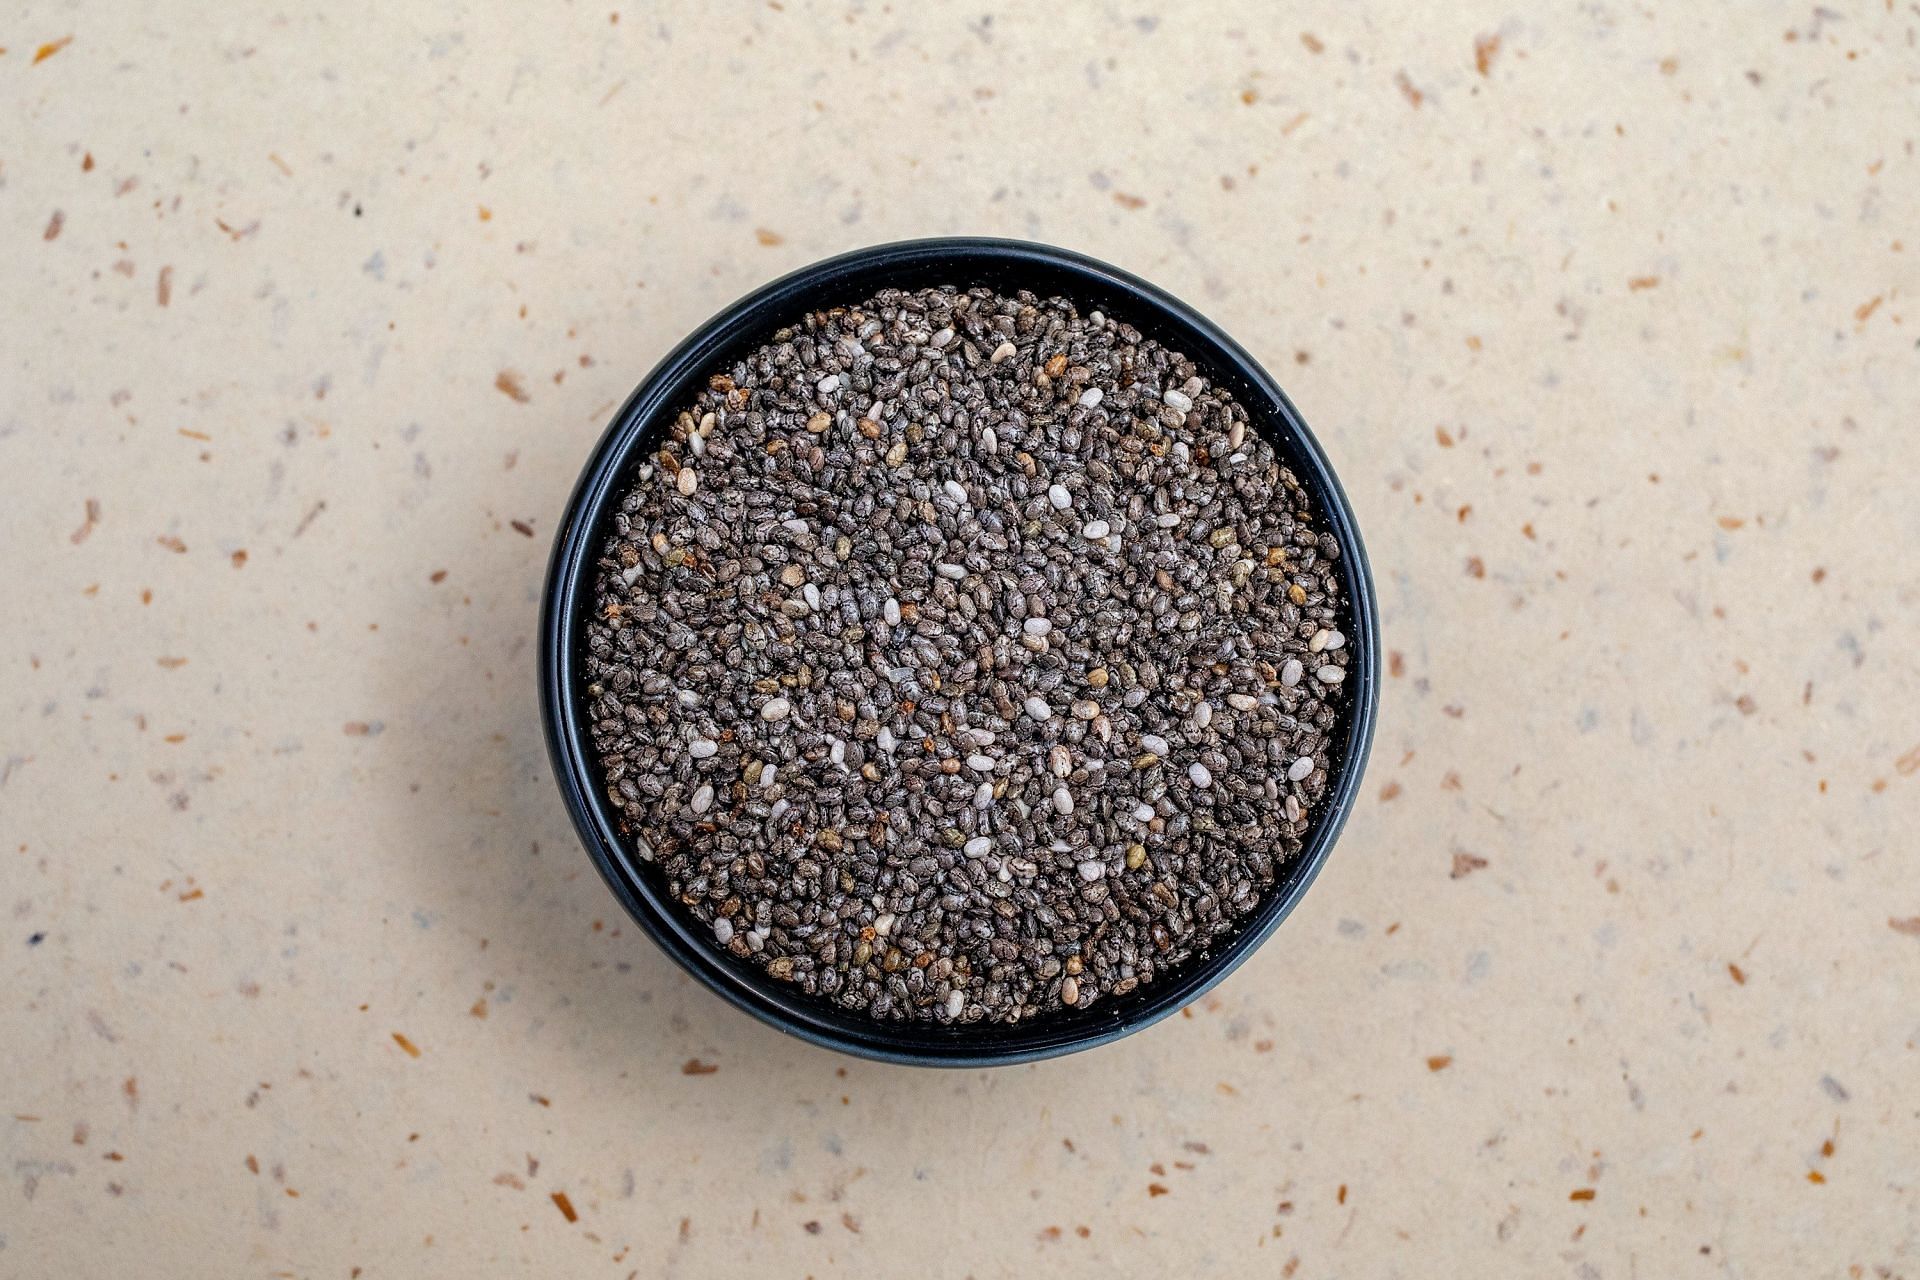 Are Chia Seeds Good For You? Here Are 5 Reasons To Add Them To Your Diet (Image via Pexels / Jubair Bin Iqbal)